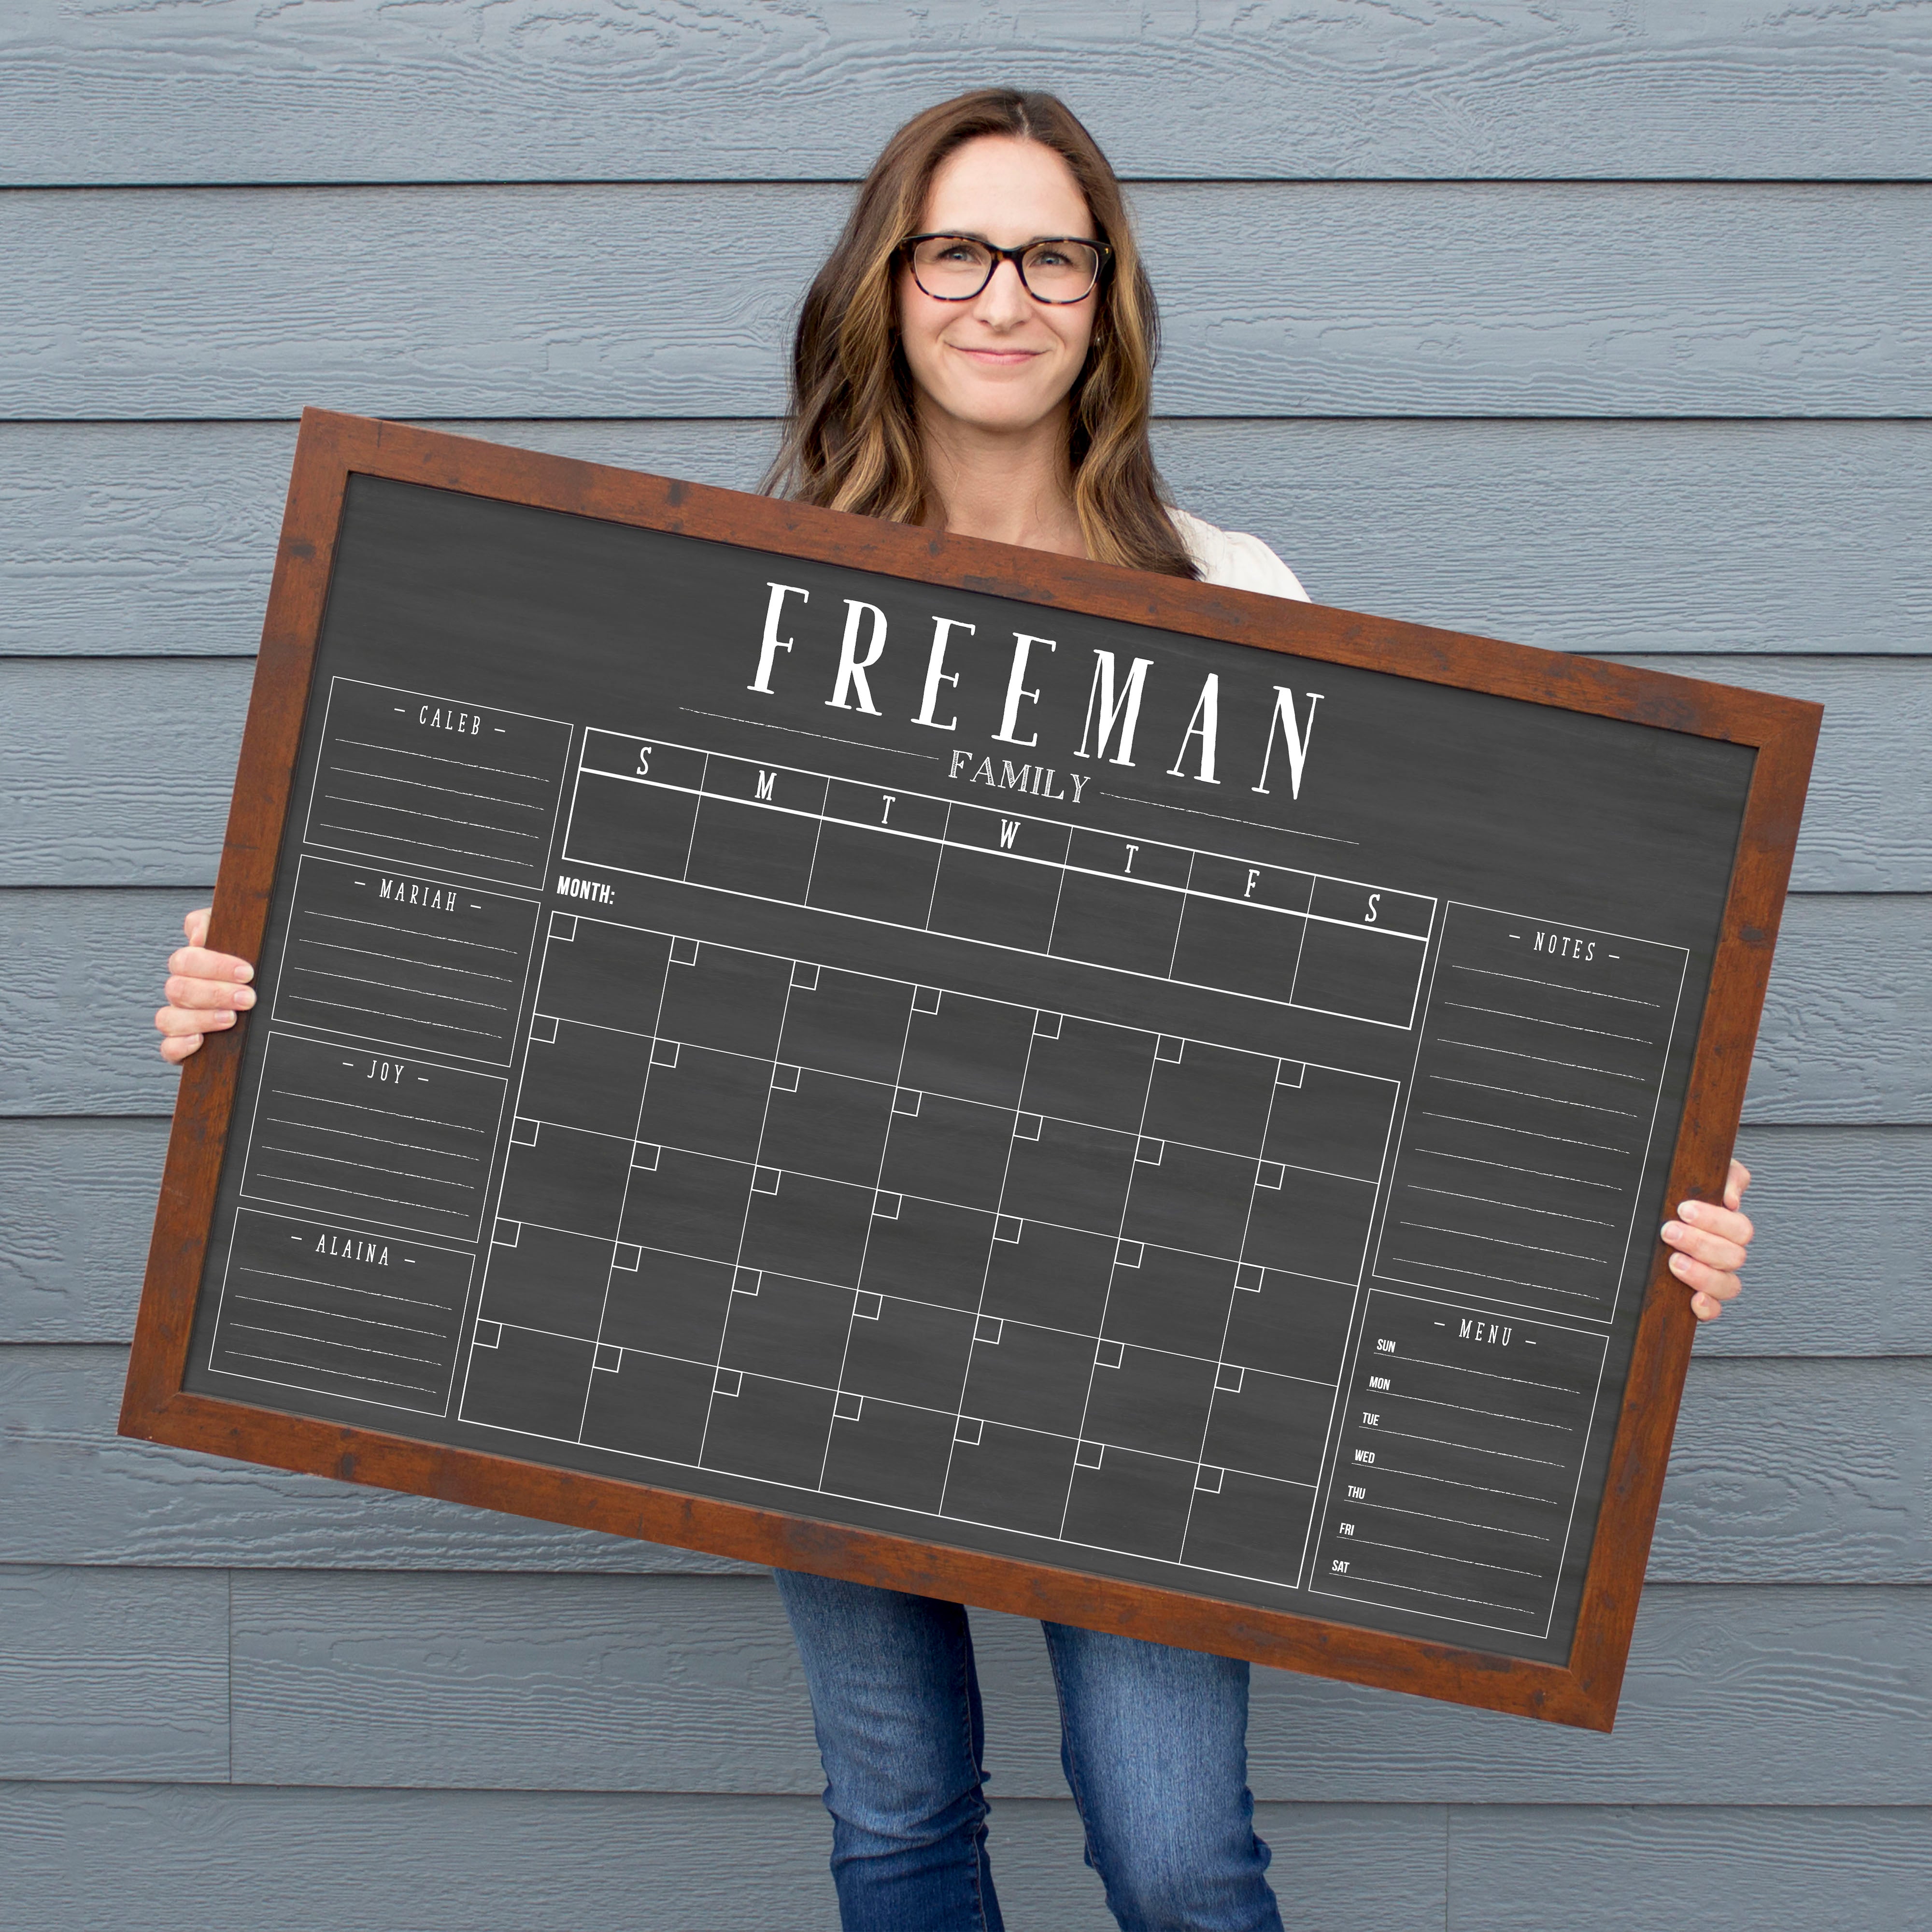 A framed dry-erase chalkboard calendar with a monthly and weekly format hanging on the wall